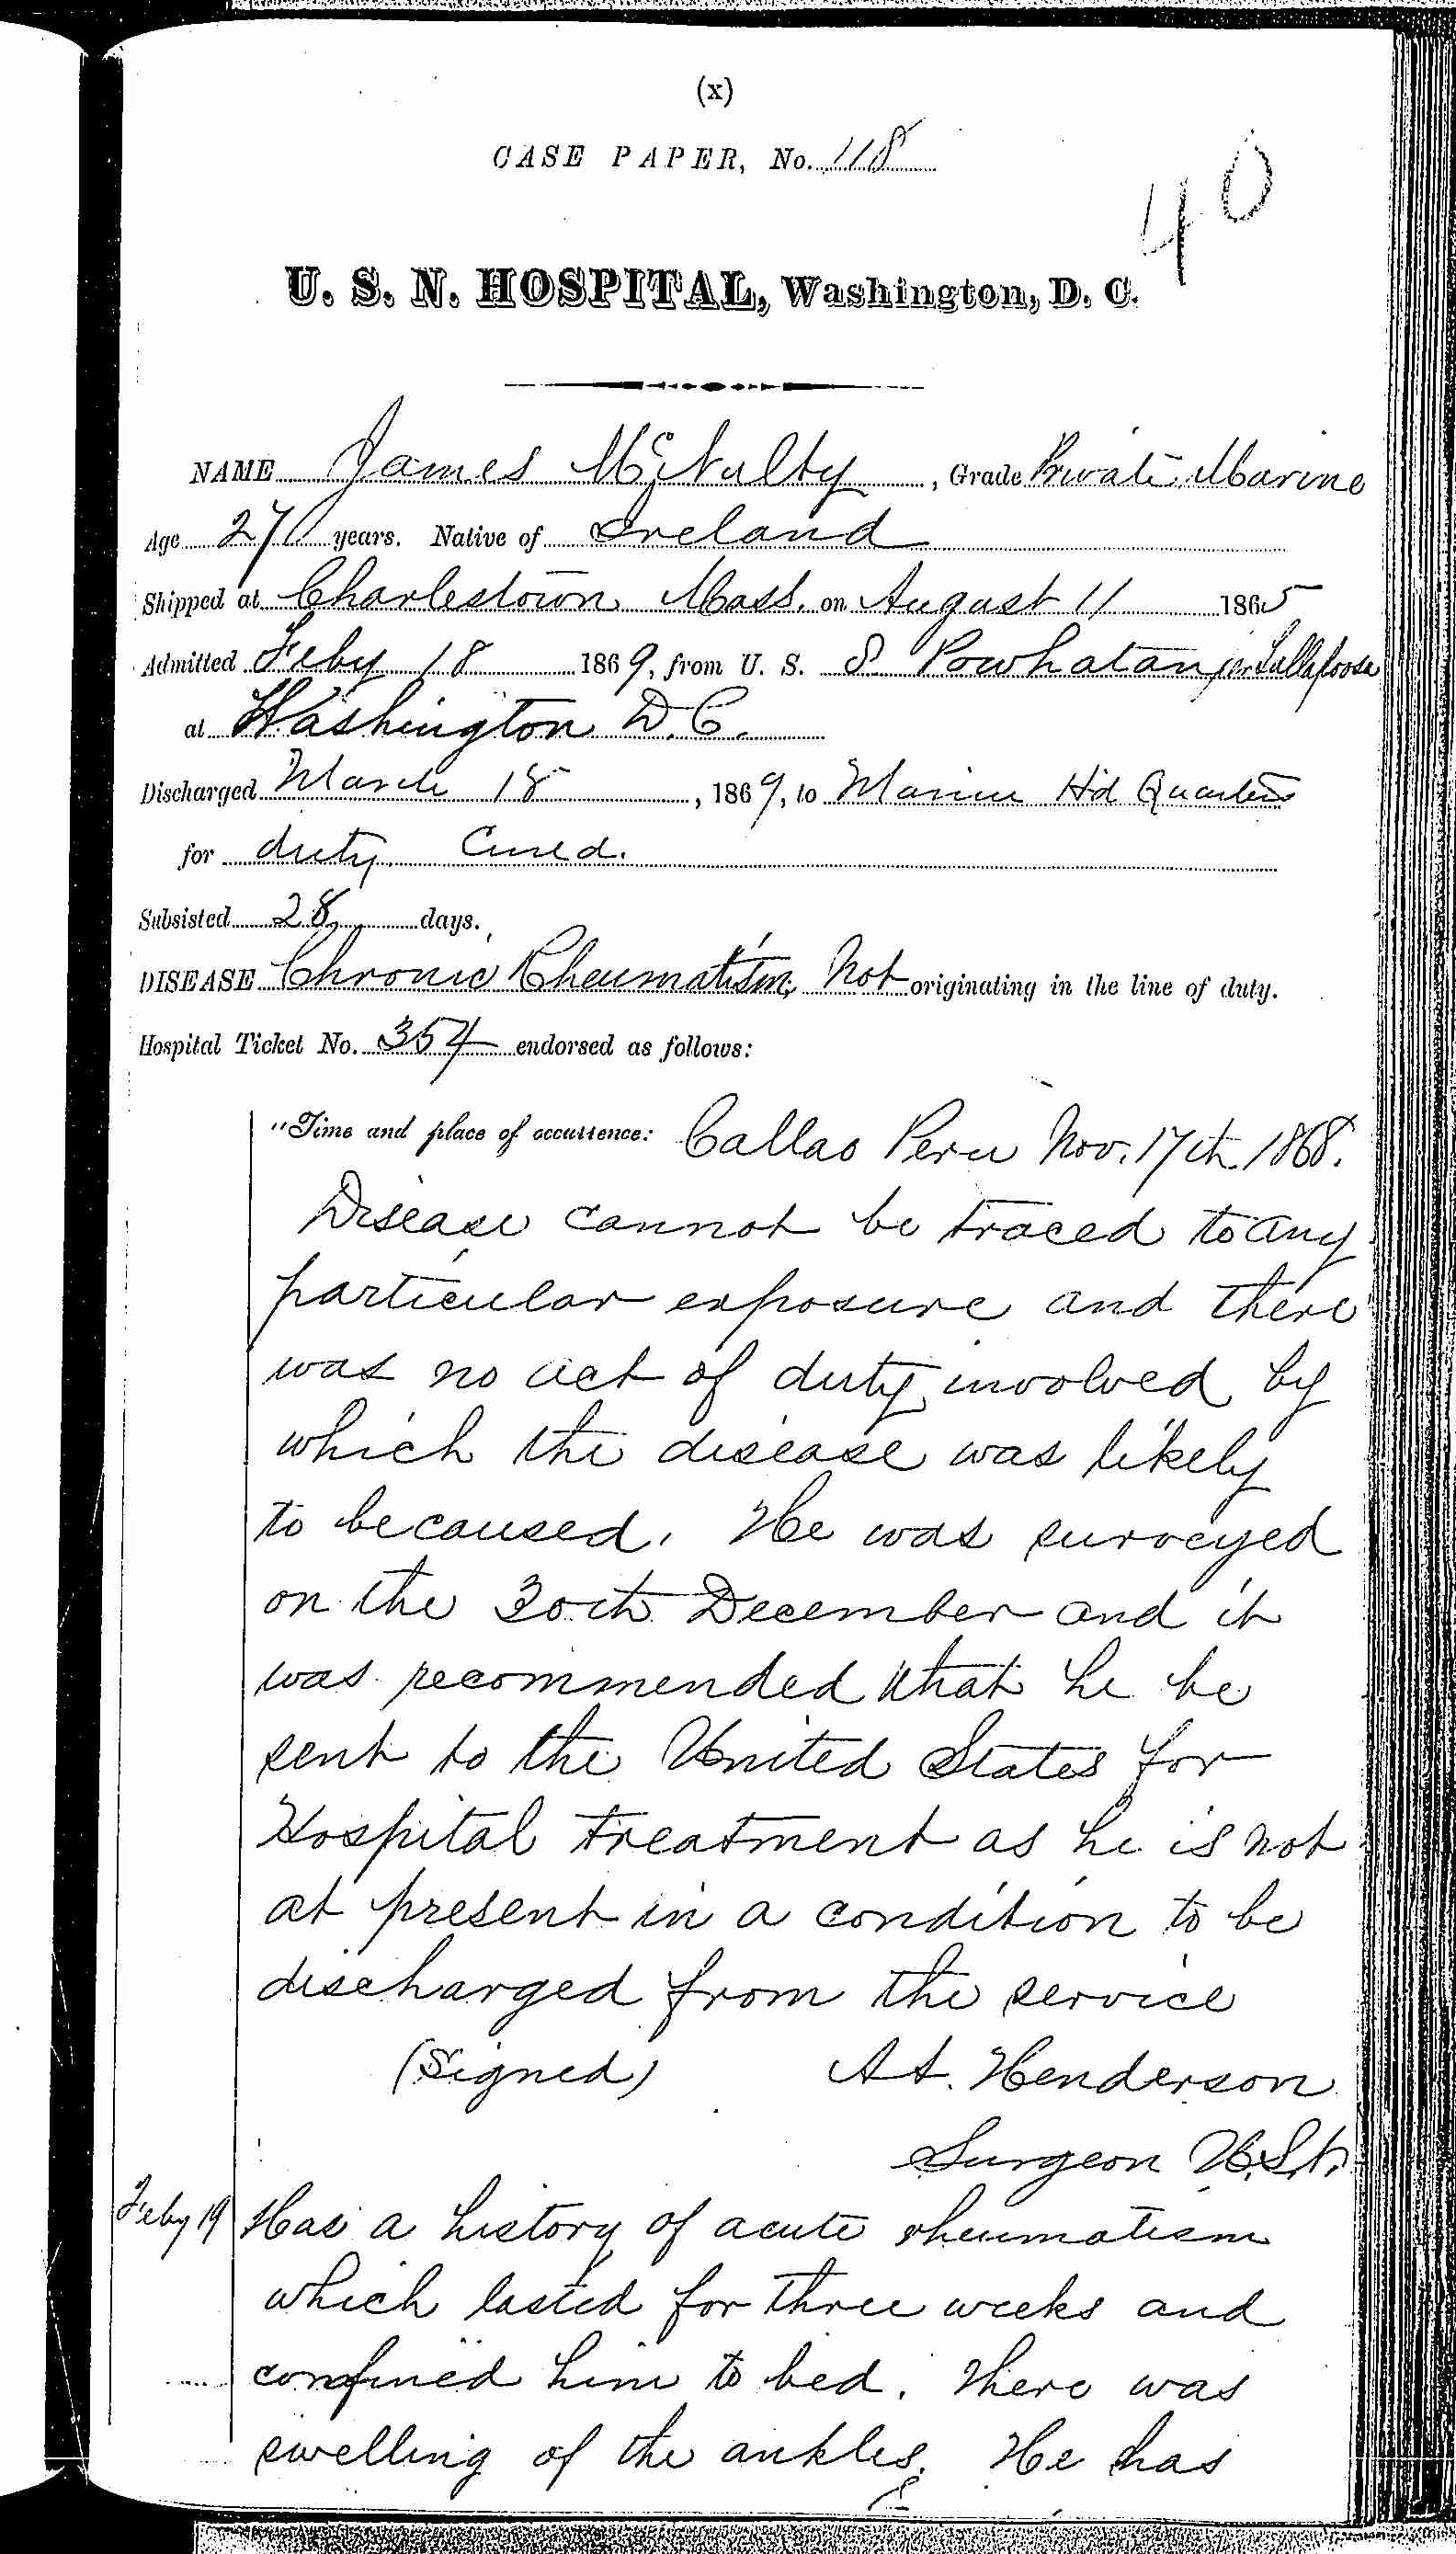 Entry for James McNalty (page 1 of 3) in the log Hospital Tickets and Case Papers - Naval Hospital - Washington, D.C. - 1868-69